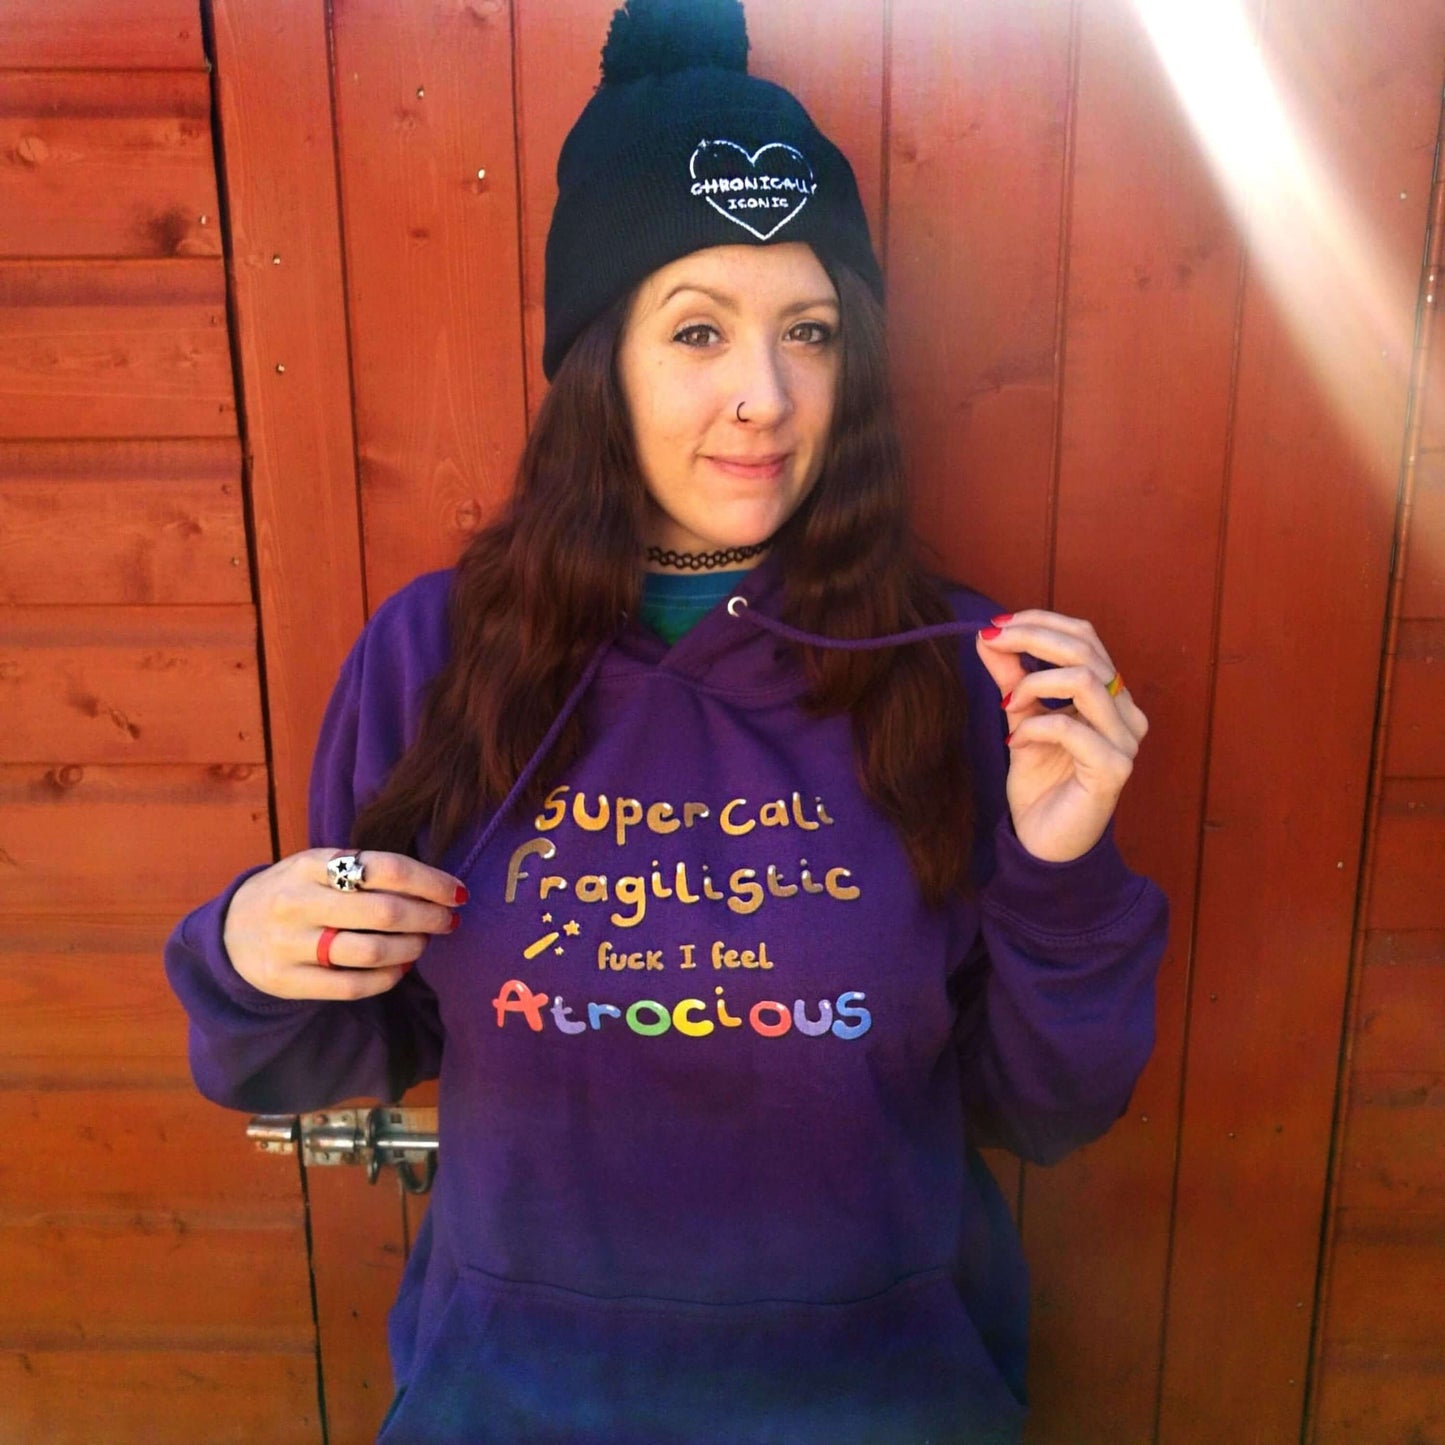 I Feel Atrocious Hoodie worn by Nikky the owner . The plum coloured hoodie has gold text on it that says 'supercali fragilistic f*** I feel' and then 'atrocious' in rainbow coloured text. Design to raise awareness for chronic illness